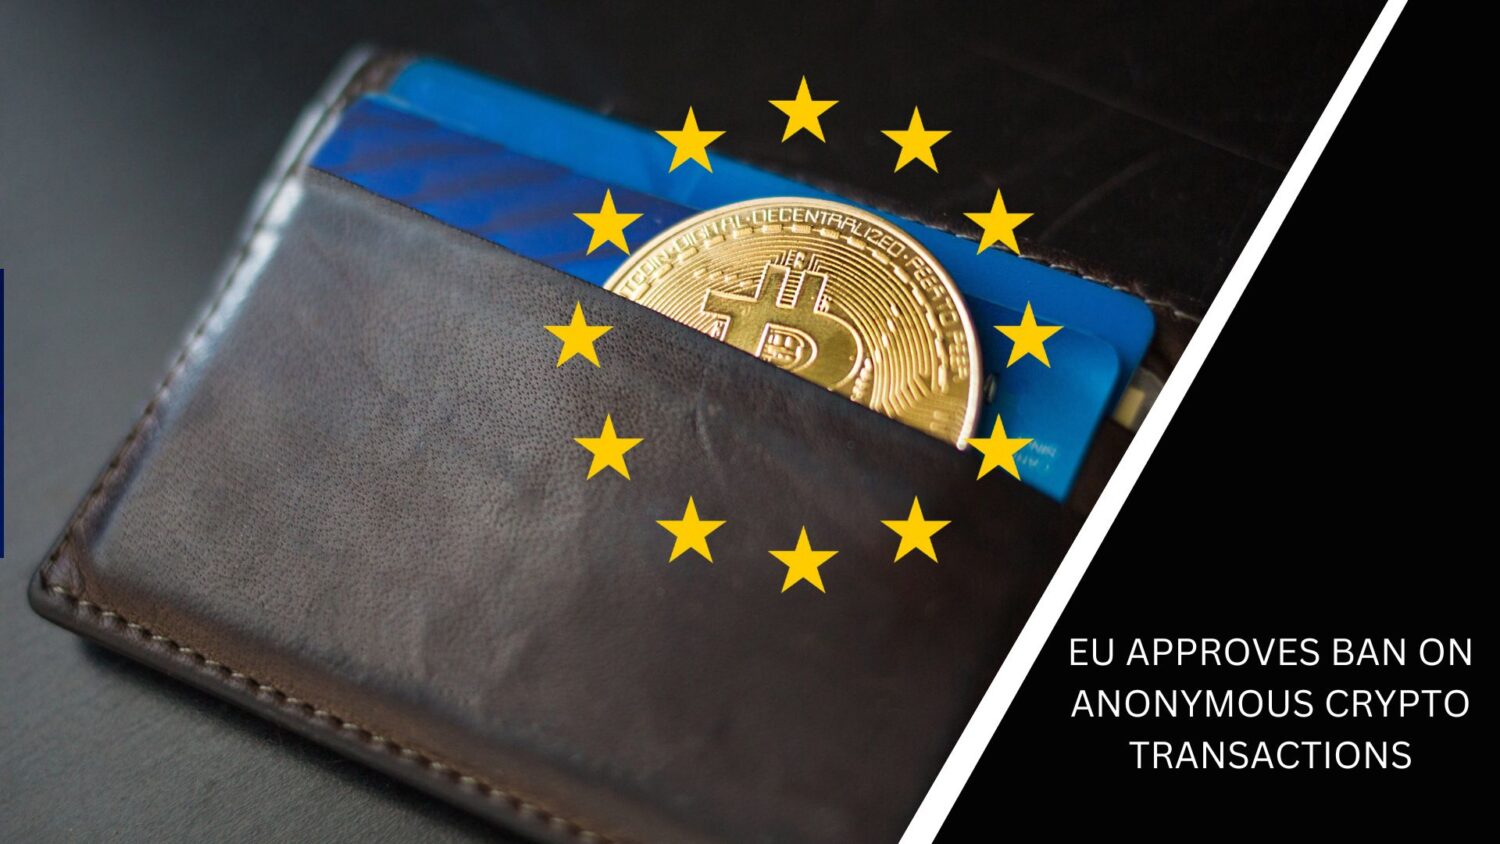 Eu Approves Ban On Anonymous Crypto Transactions